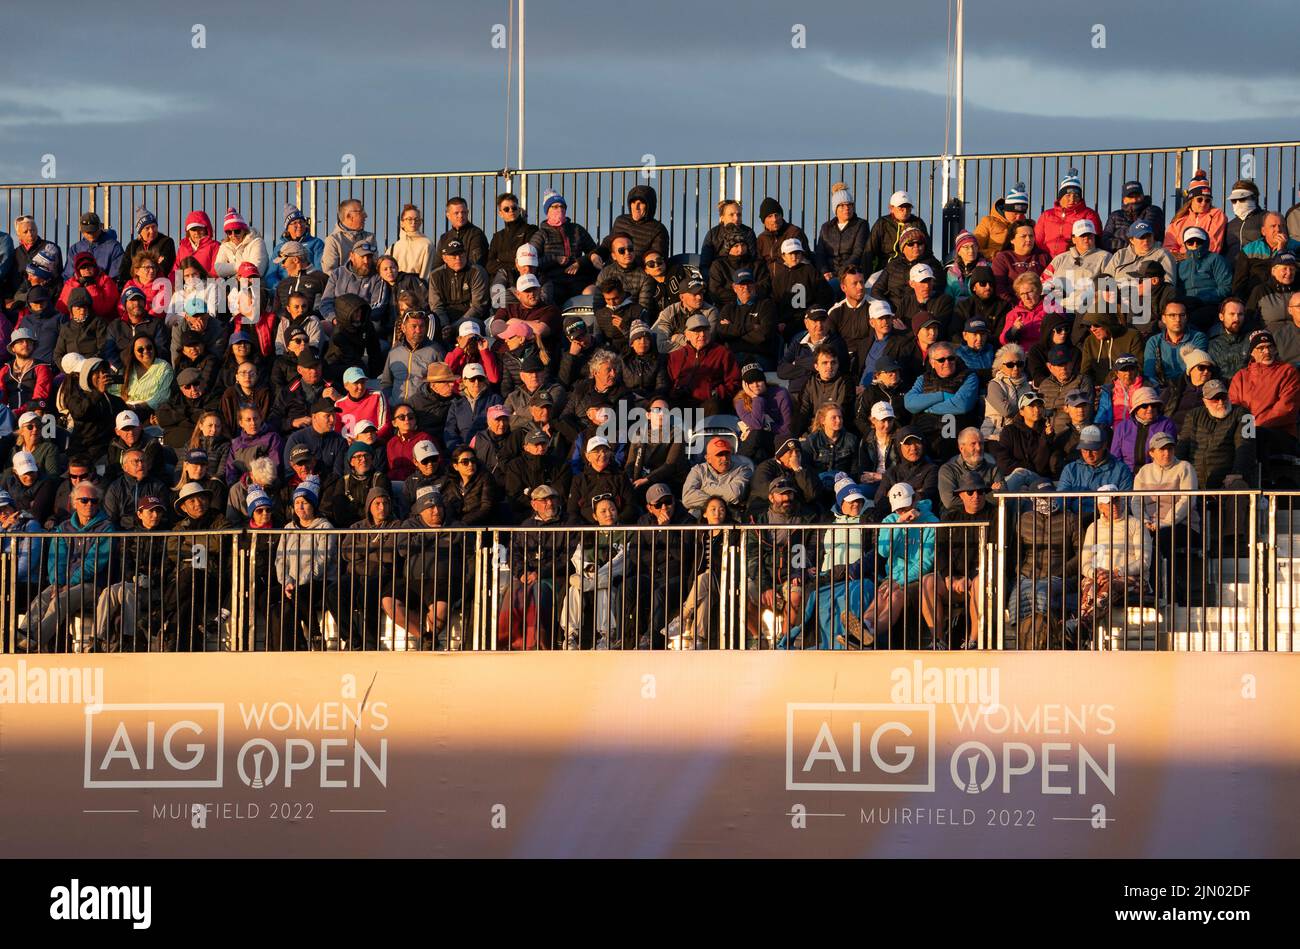 Gullane, Scotland, UK. 7th August 2022. Final  round of the AIG Women’s Open golf championship at Muirfield in Gullane, East Lothian. Pic; Spectators in stand beside the 19th green.   Iain Masterton/Alamy Live News Stock Photo